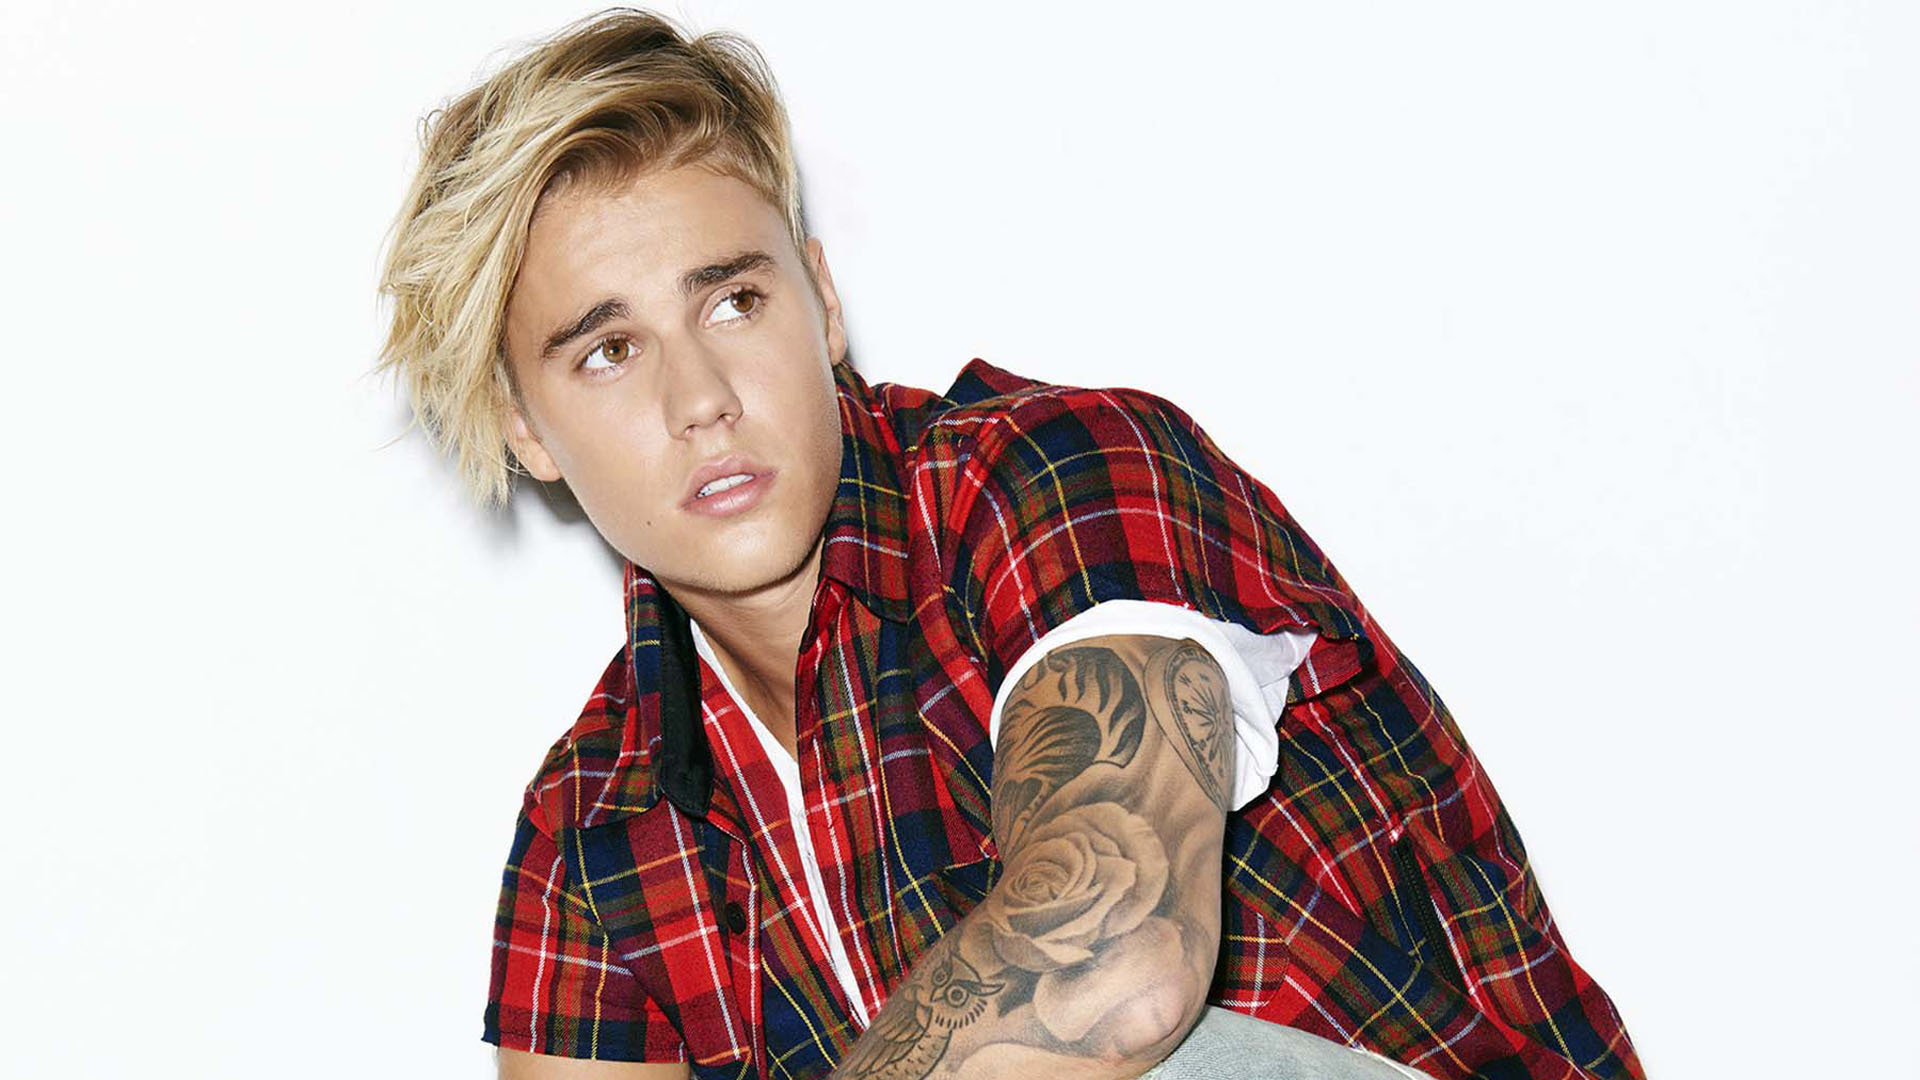 Justin Bieber Wallpapers Images Photos Pictures Backgrounds